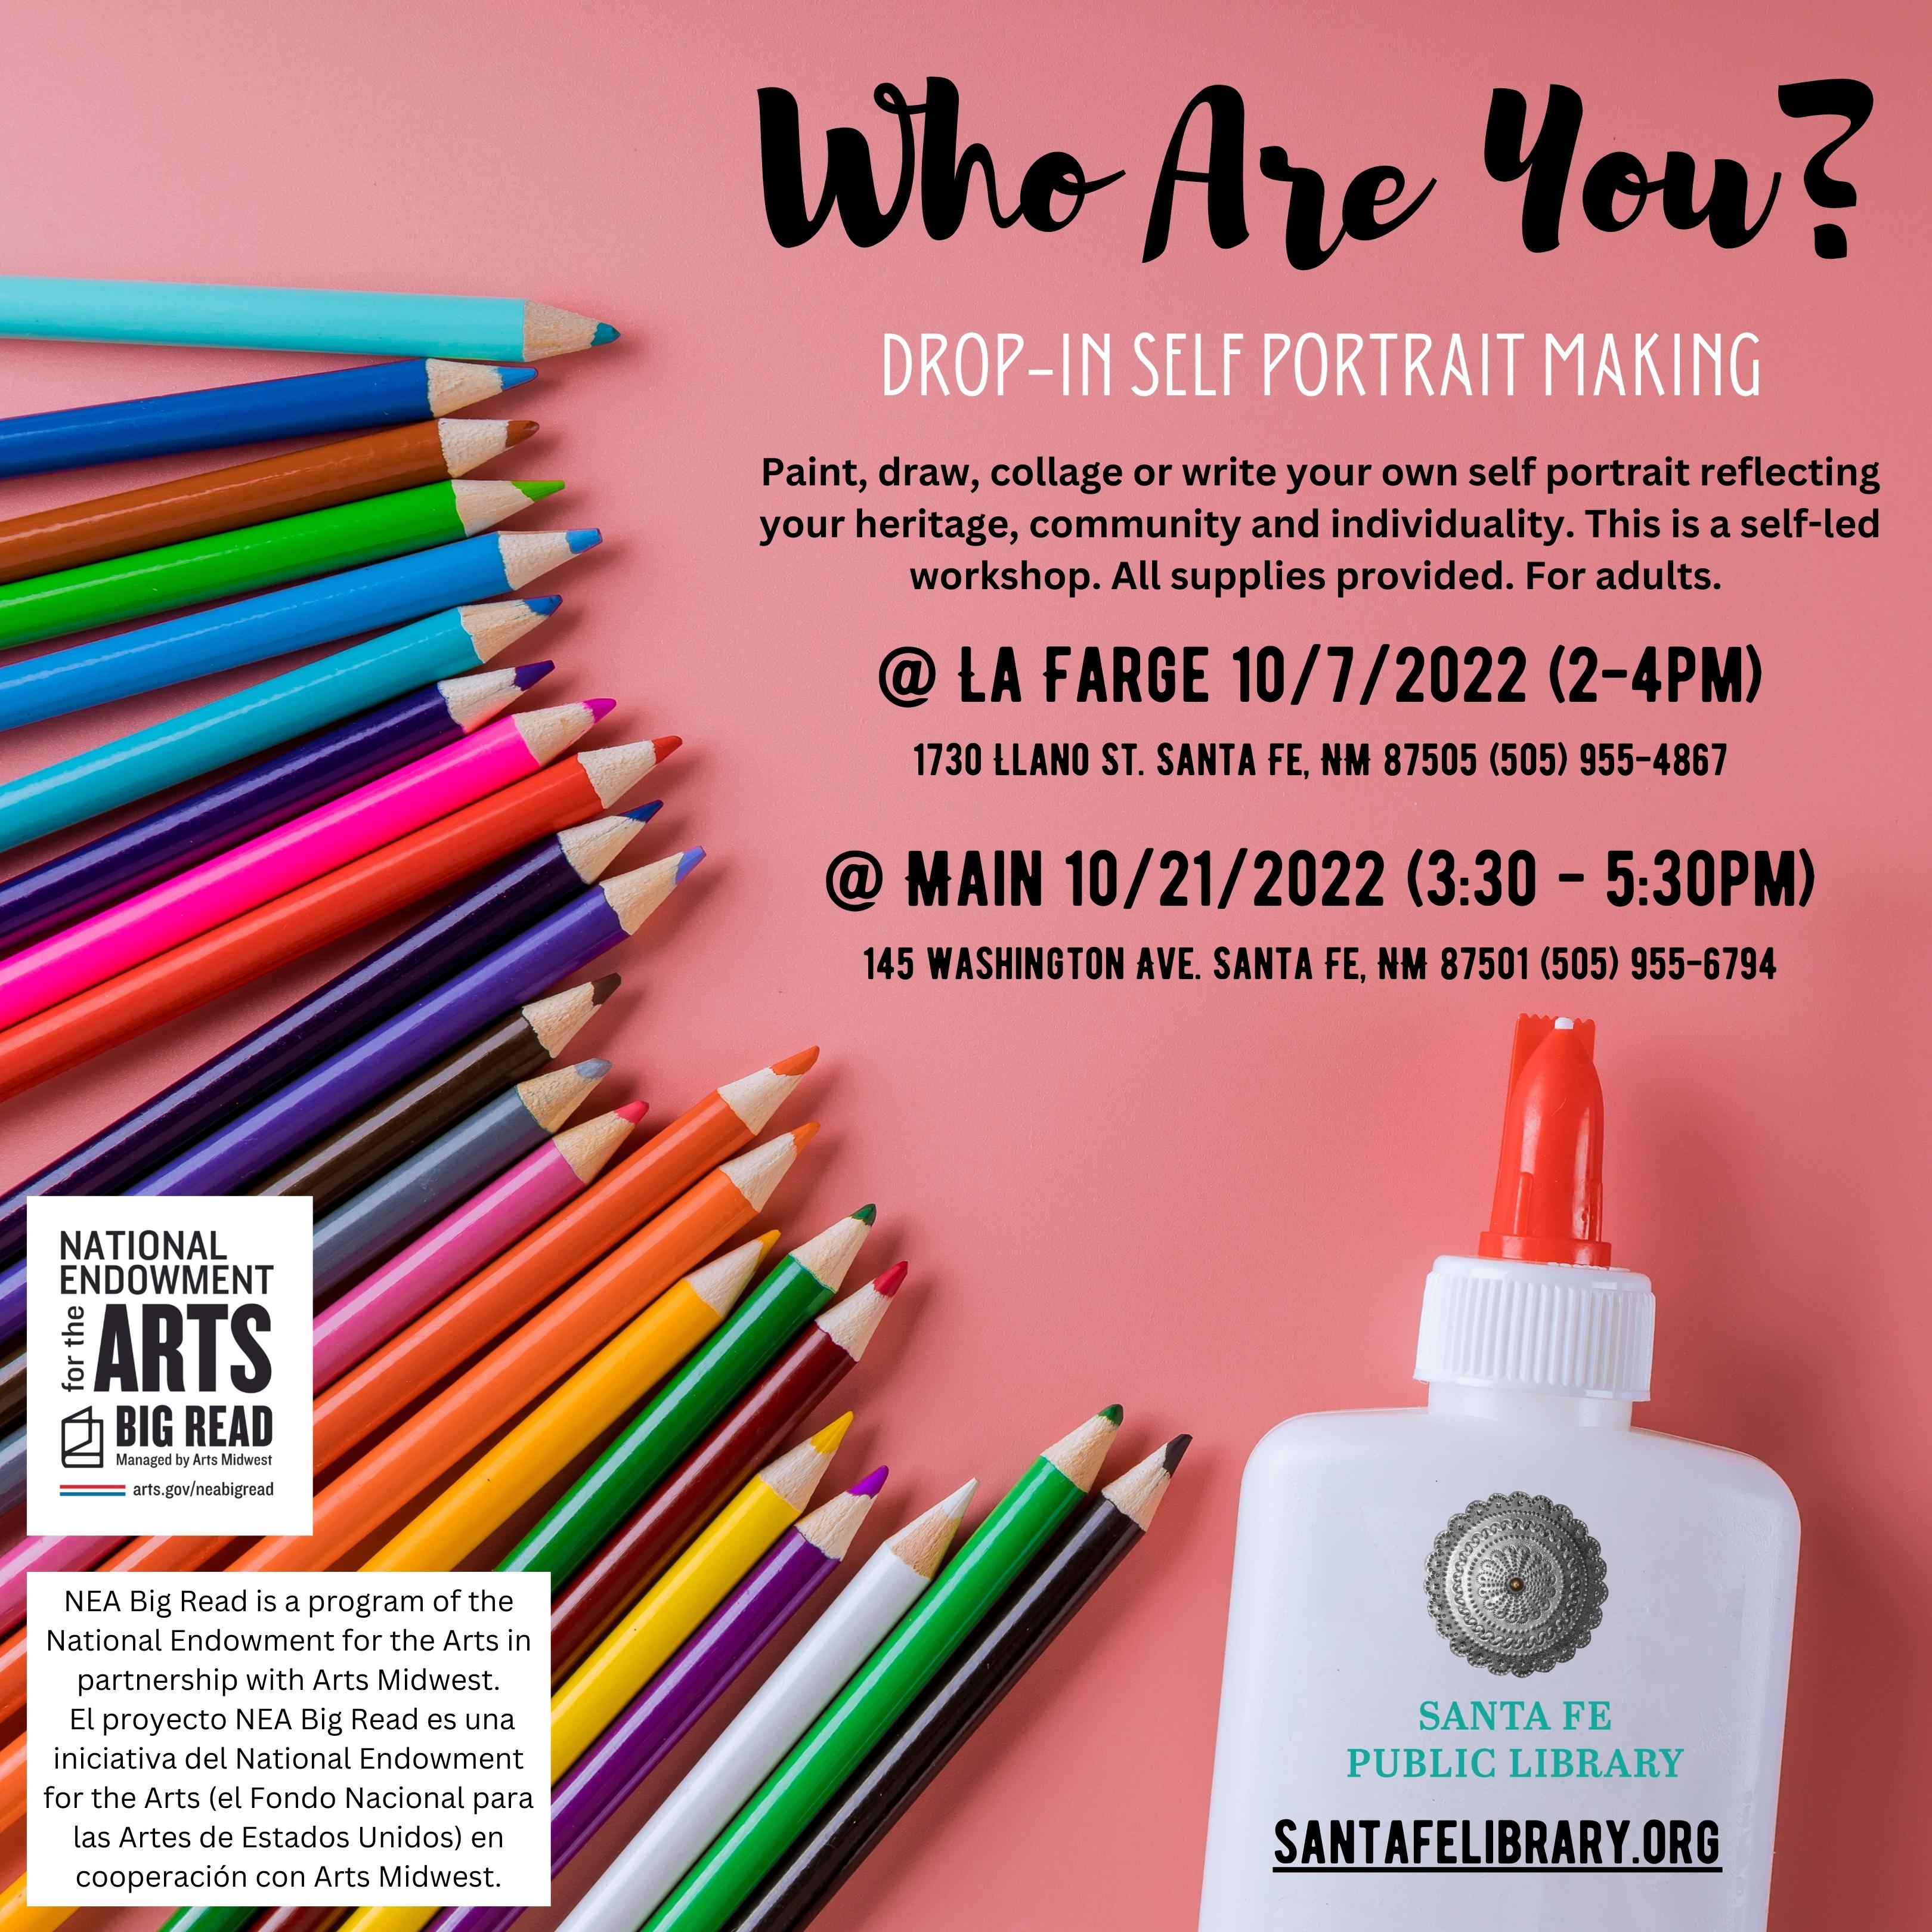 Who Are You? Drop-In Self Portrait Making